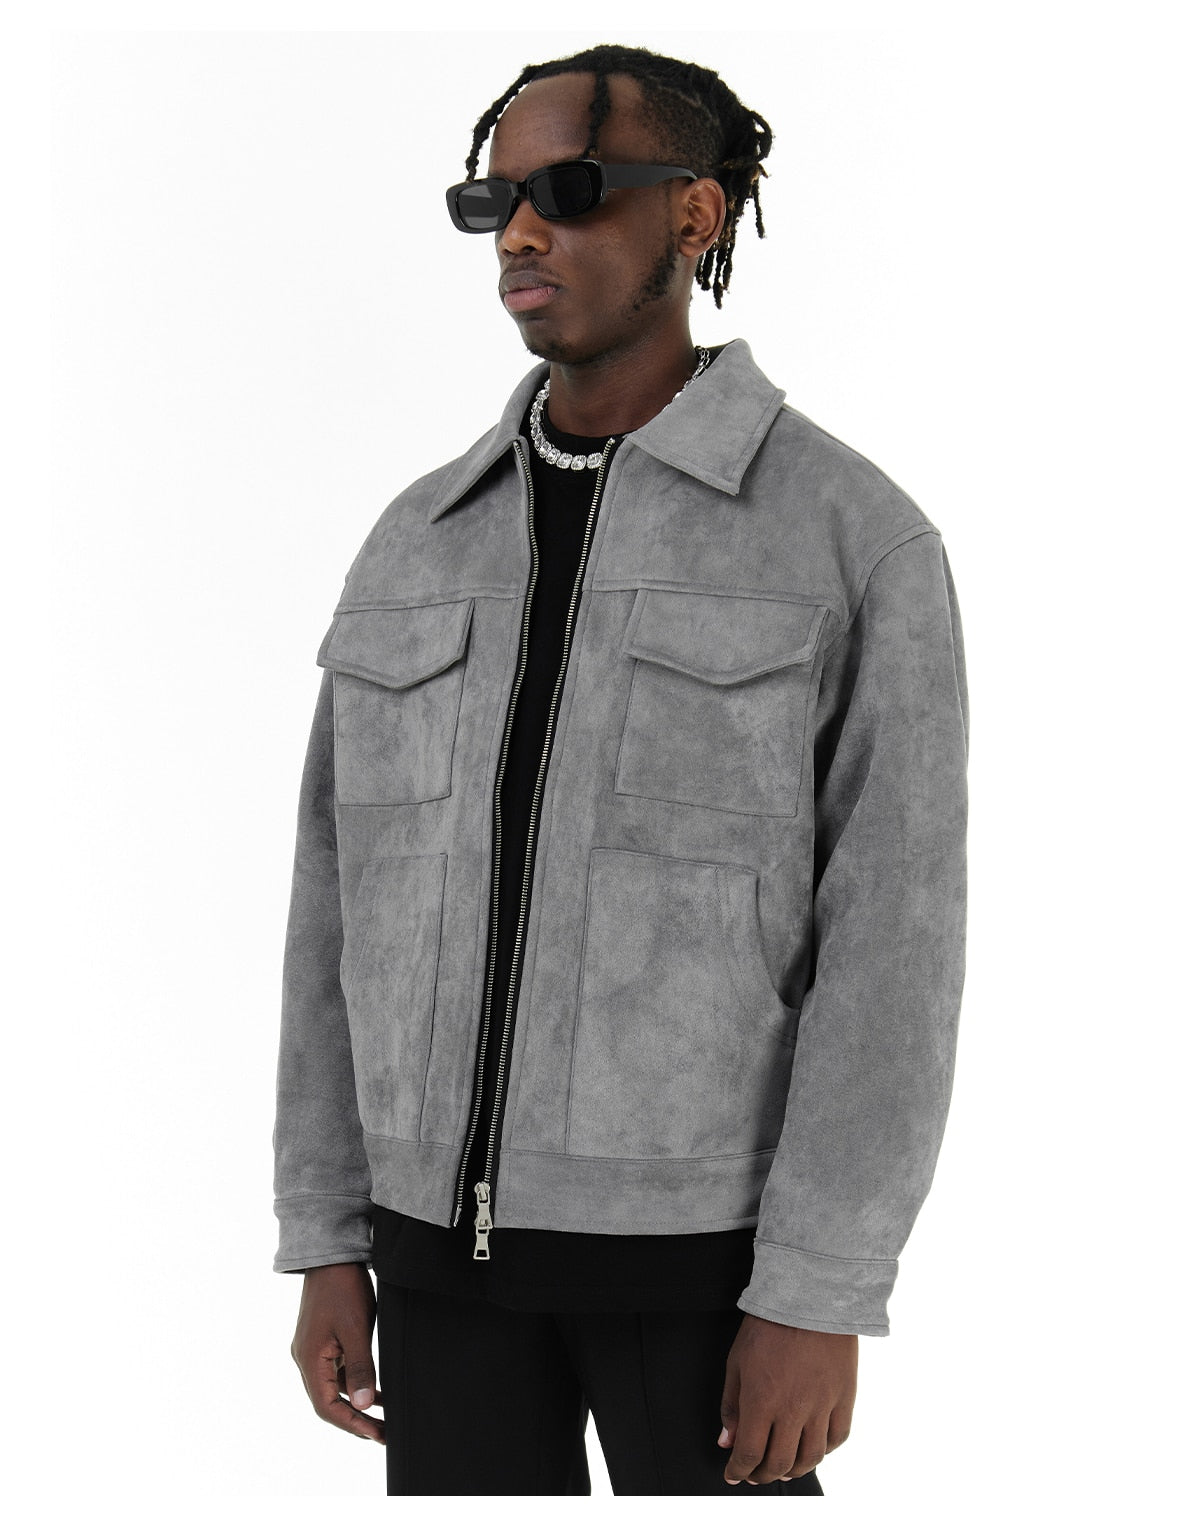 Suede Cargo Jacket - B.A.G.S (Black Apparel and Goods Store) 